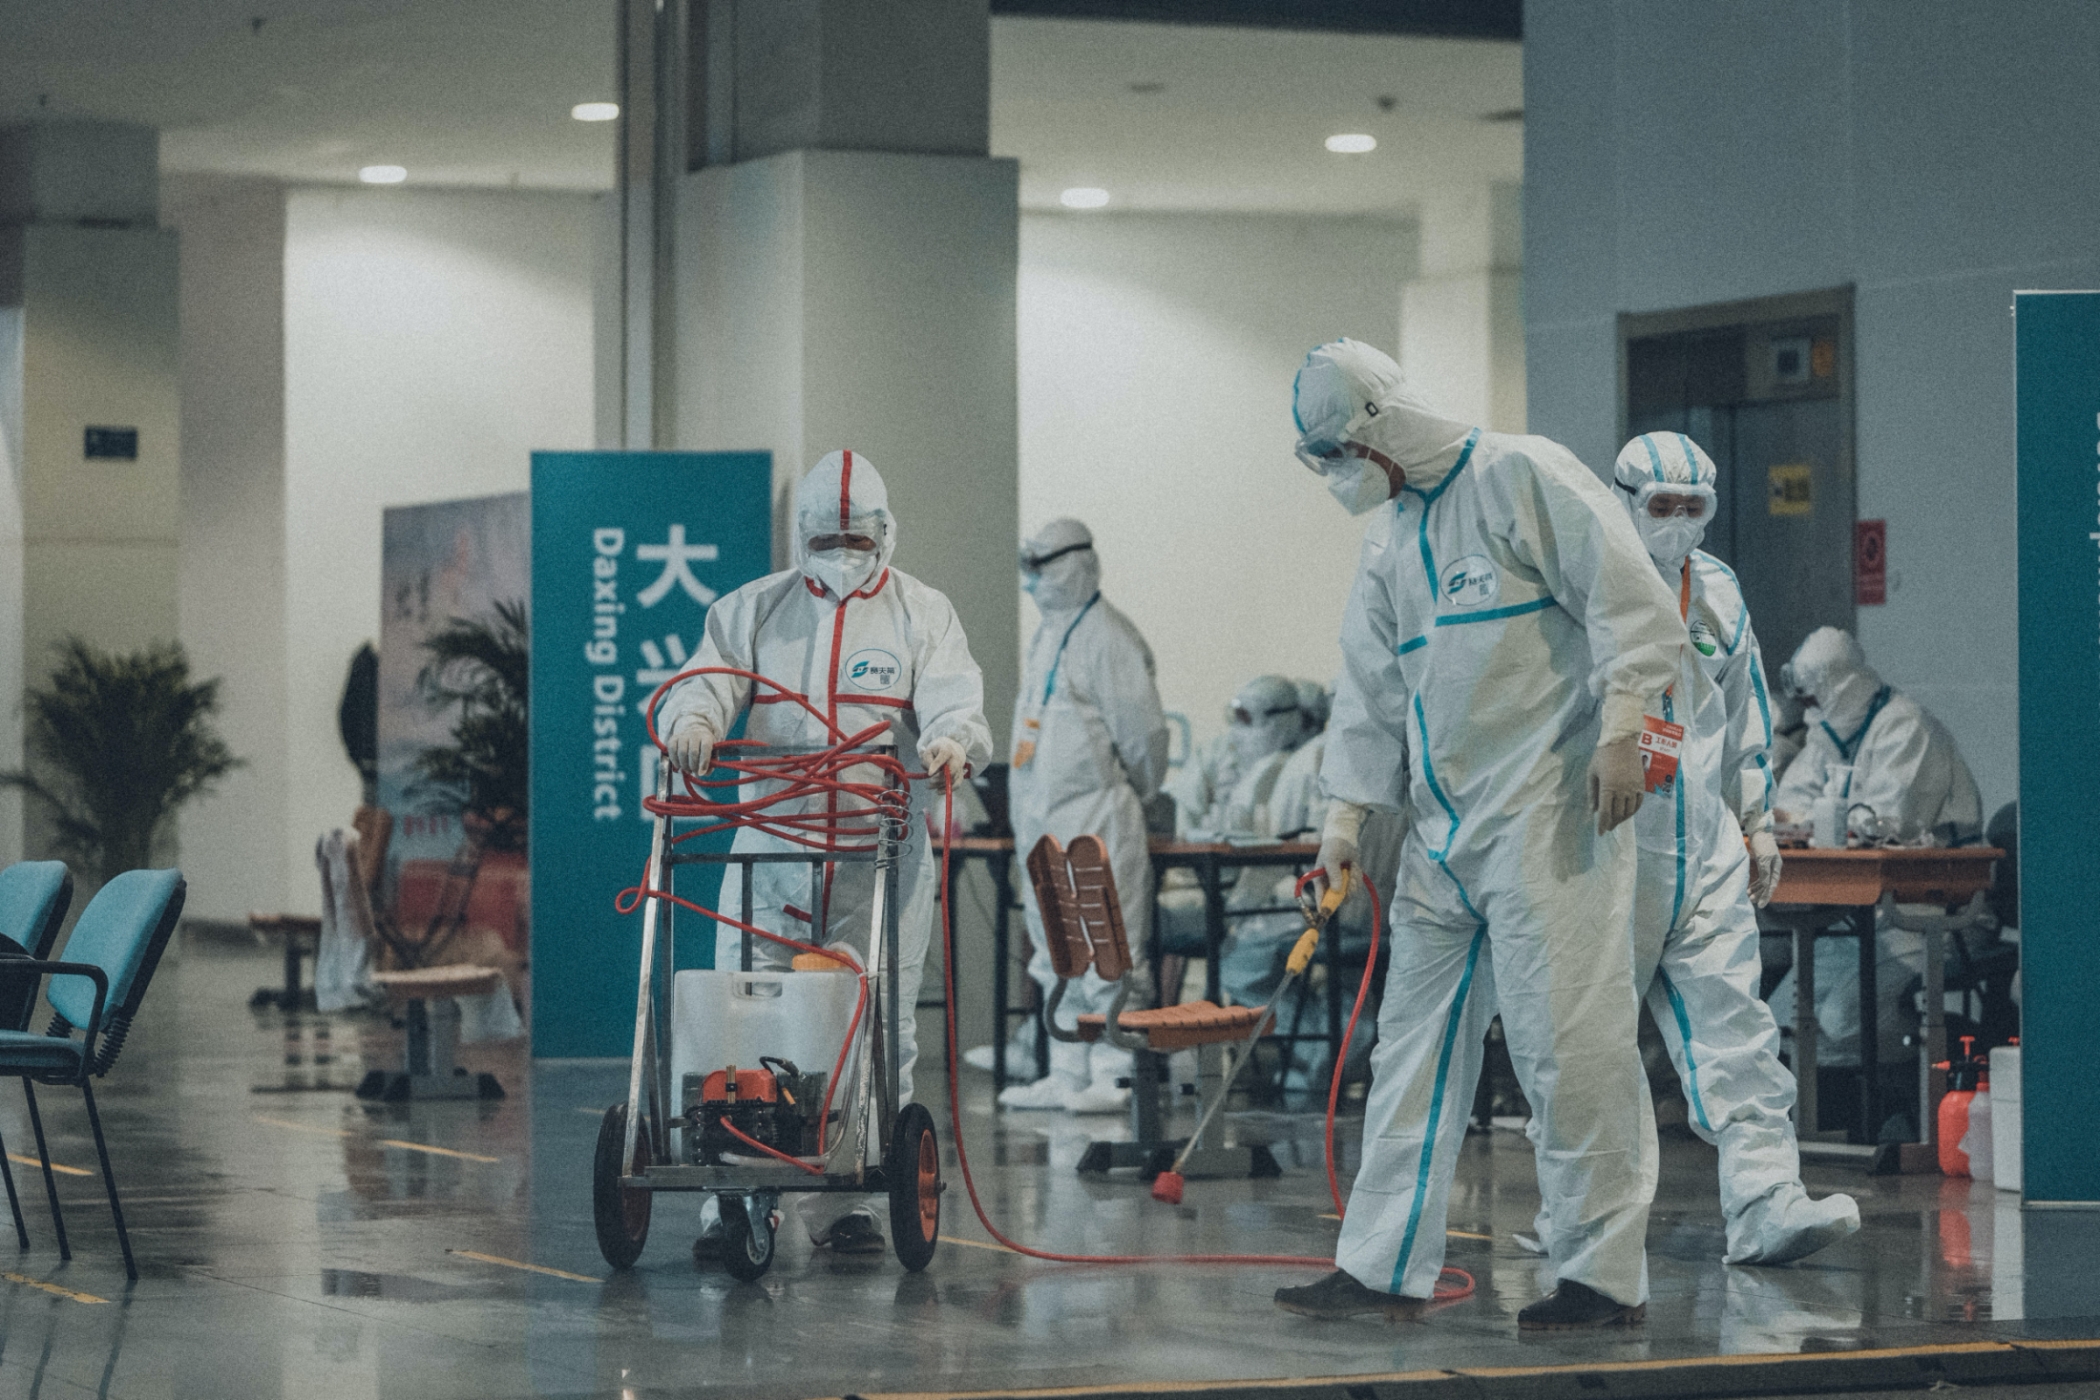 Mass disinfections in Daxing District, Beijing, China, during the COVID-19 pandemic (Source: Tedward Quinn/Unsplash)